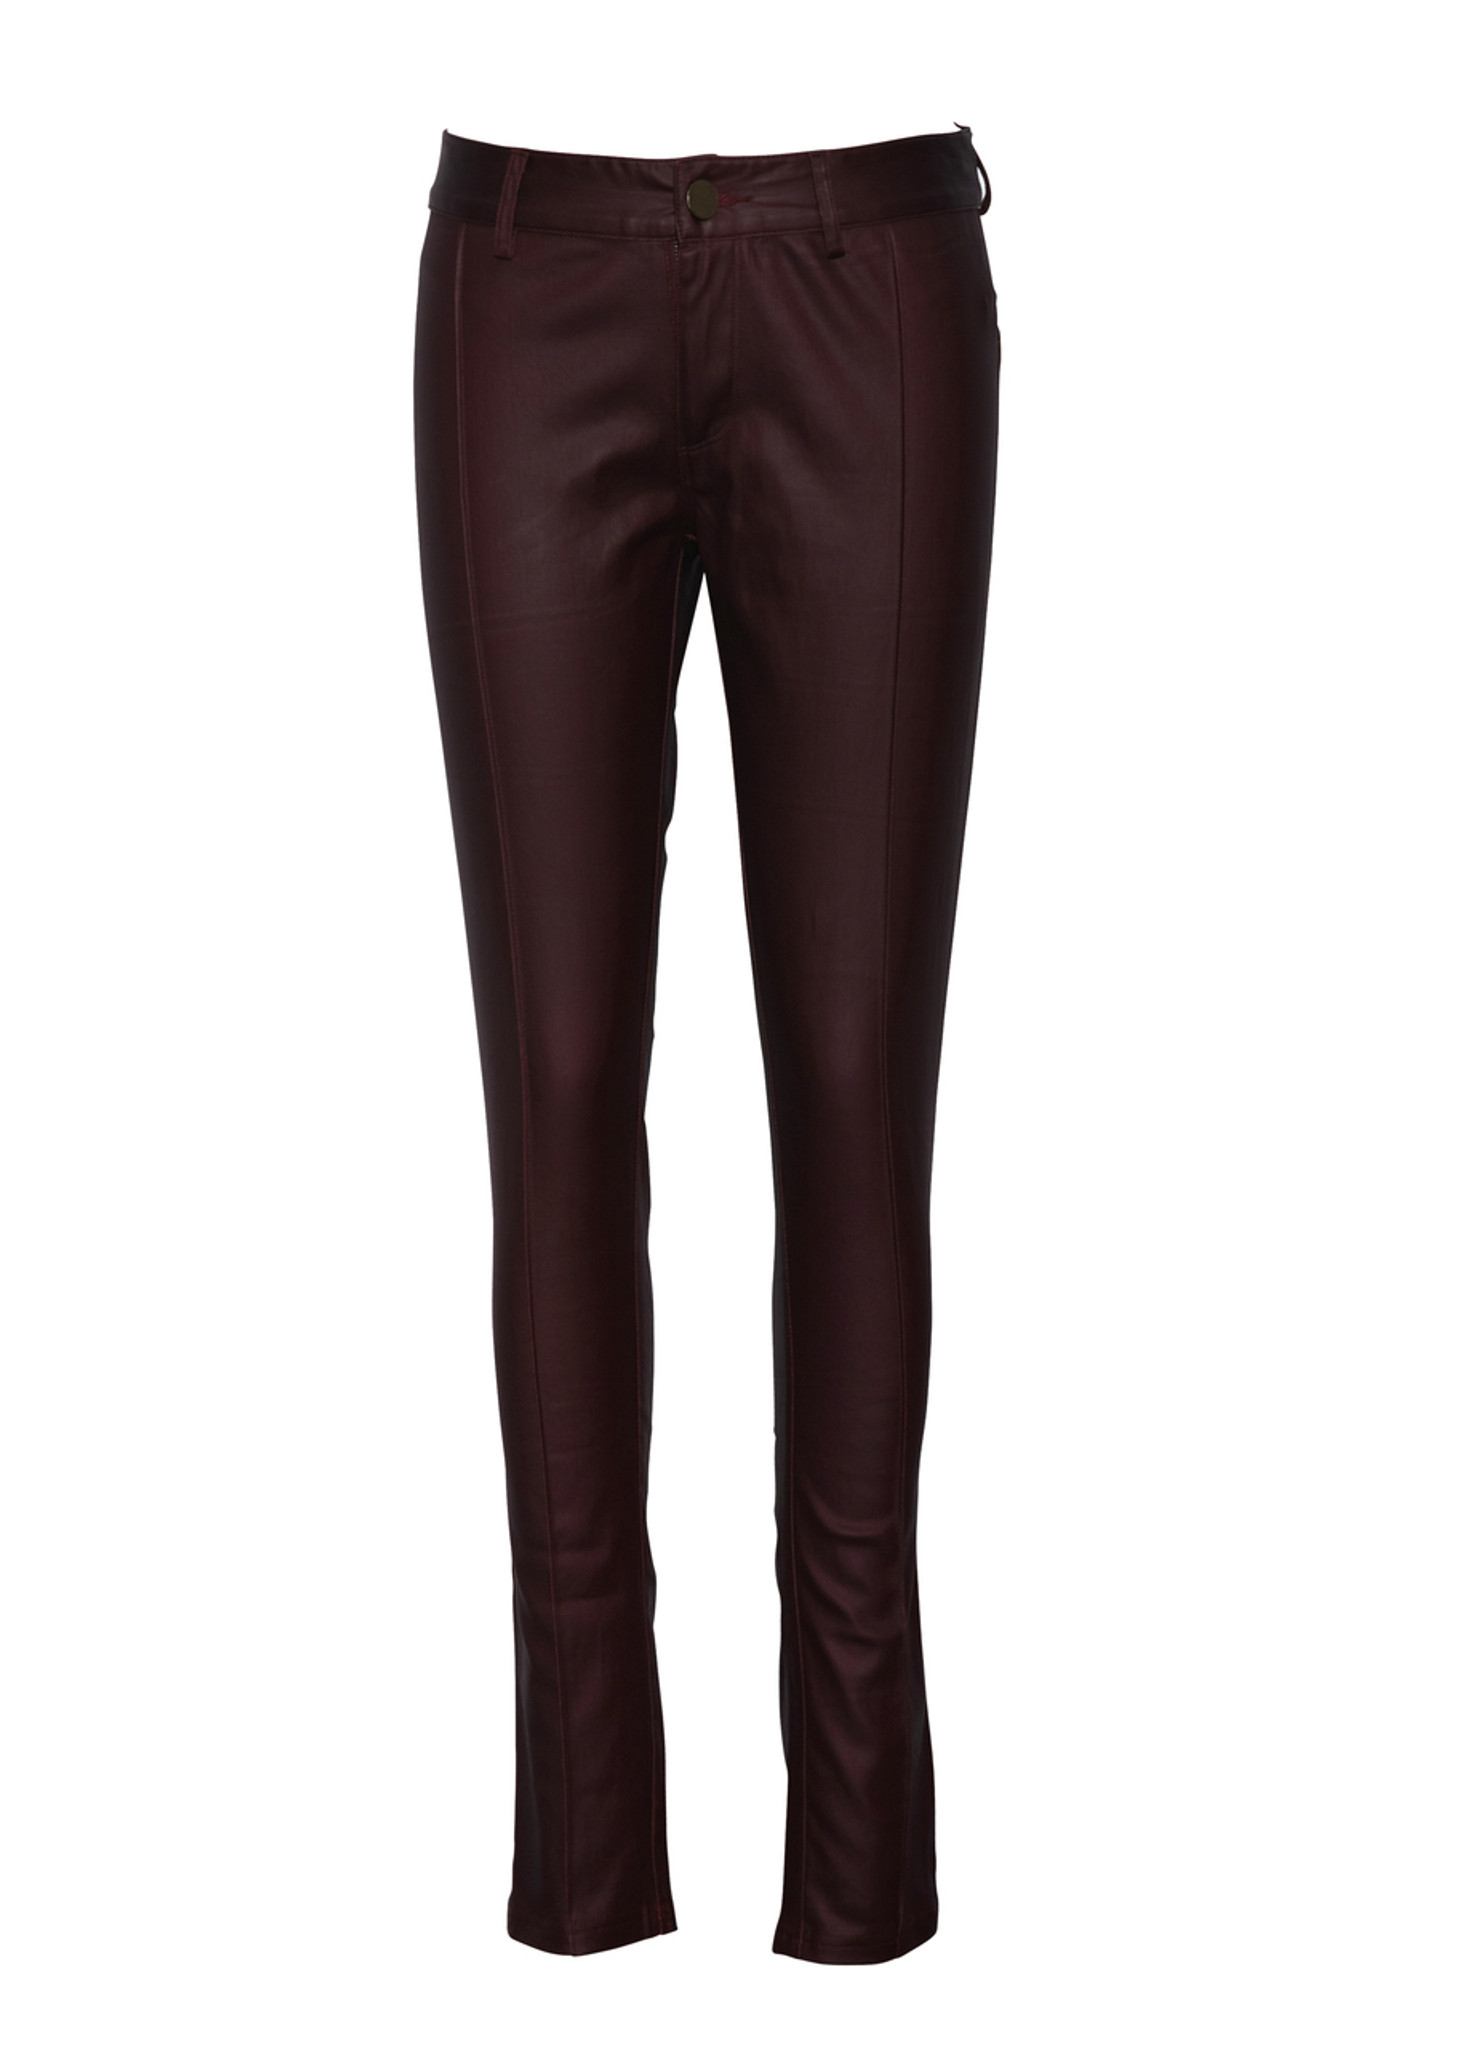 High Risk Pant by COOPER ST | Women’s Pants | @ alibiOnline